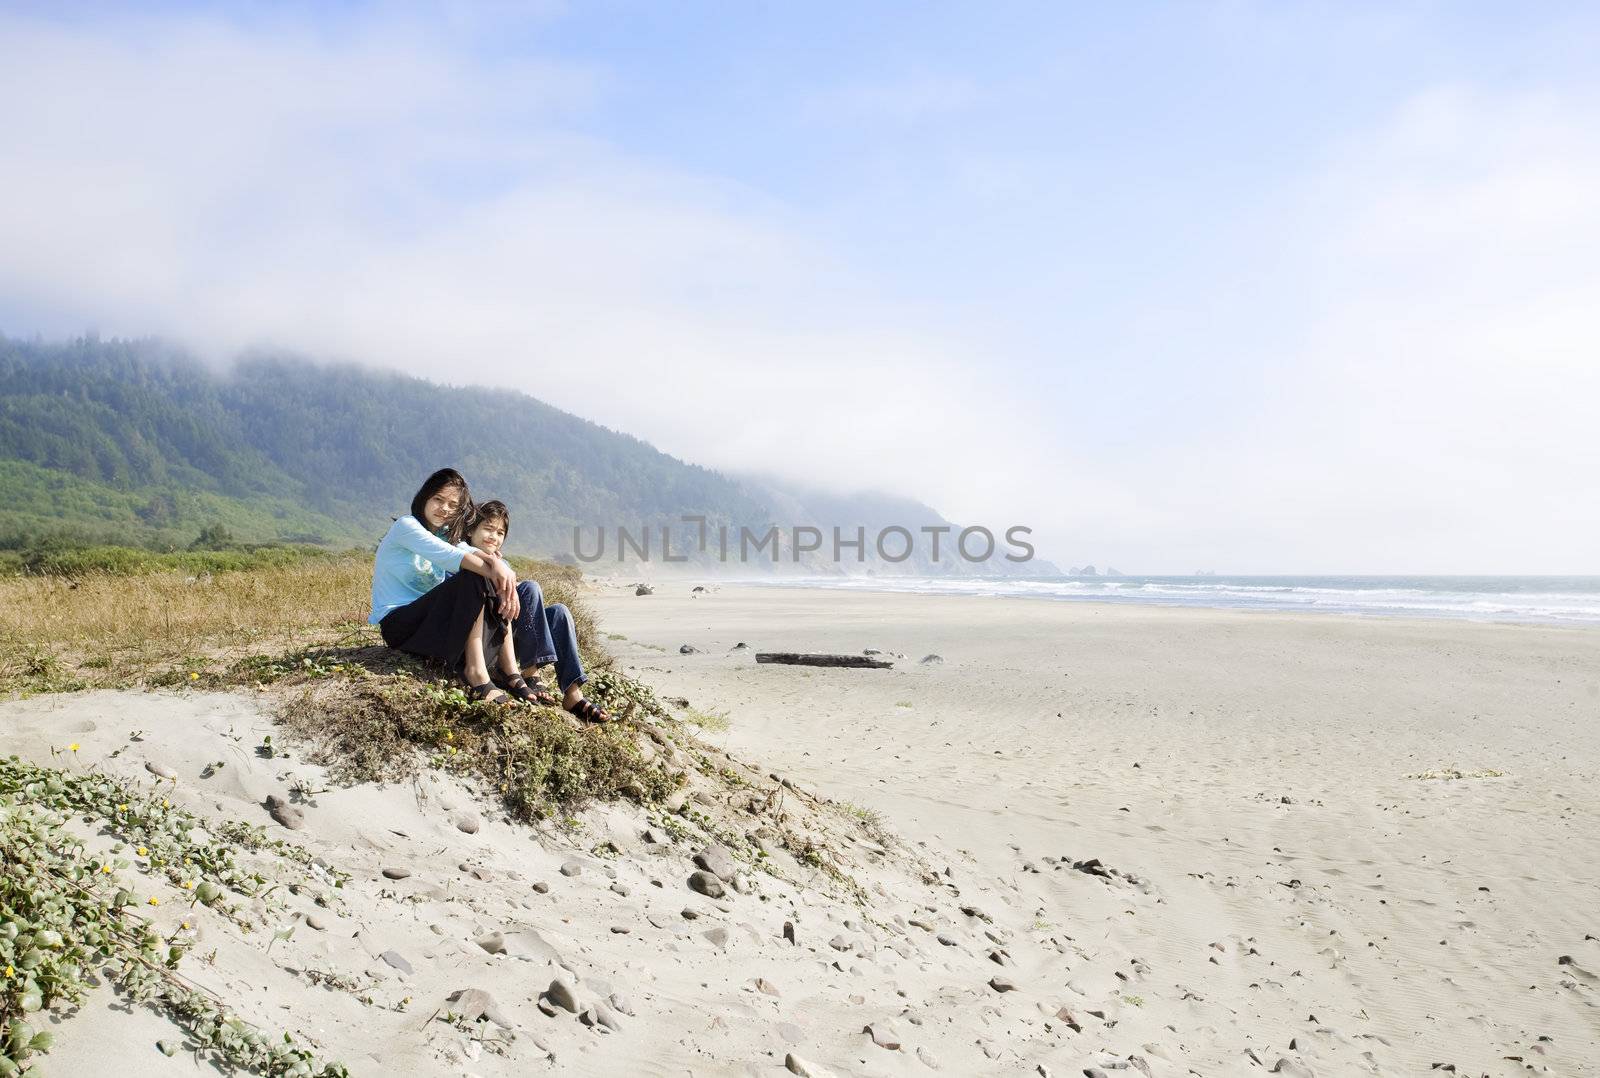 Two young girls enjoying the beach by the ocean shore by jarenwicklund